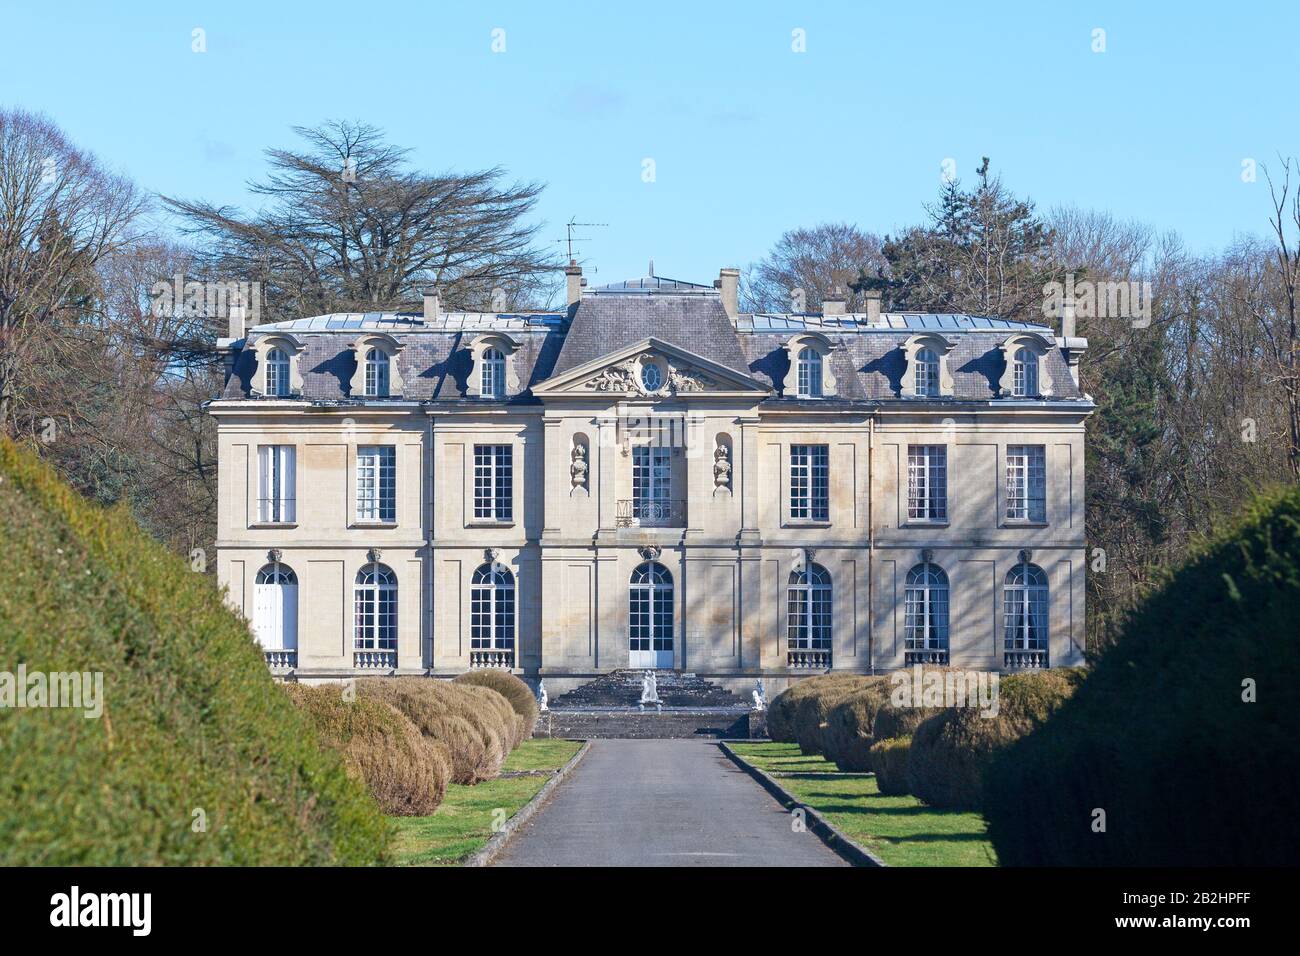 Luzarches, France - March 16 2019: The Château de Saint-Thaurin (English: Saint-Thaurin Castle) dates from the beginning of the 20th century. Stock Photo